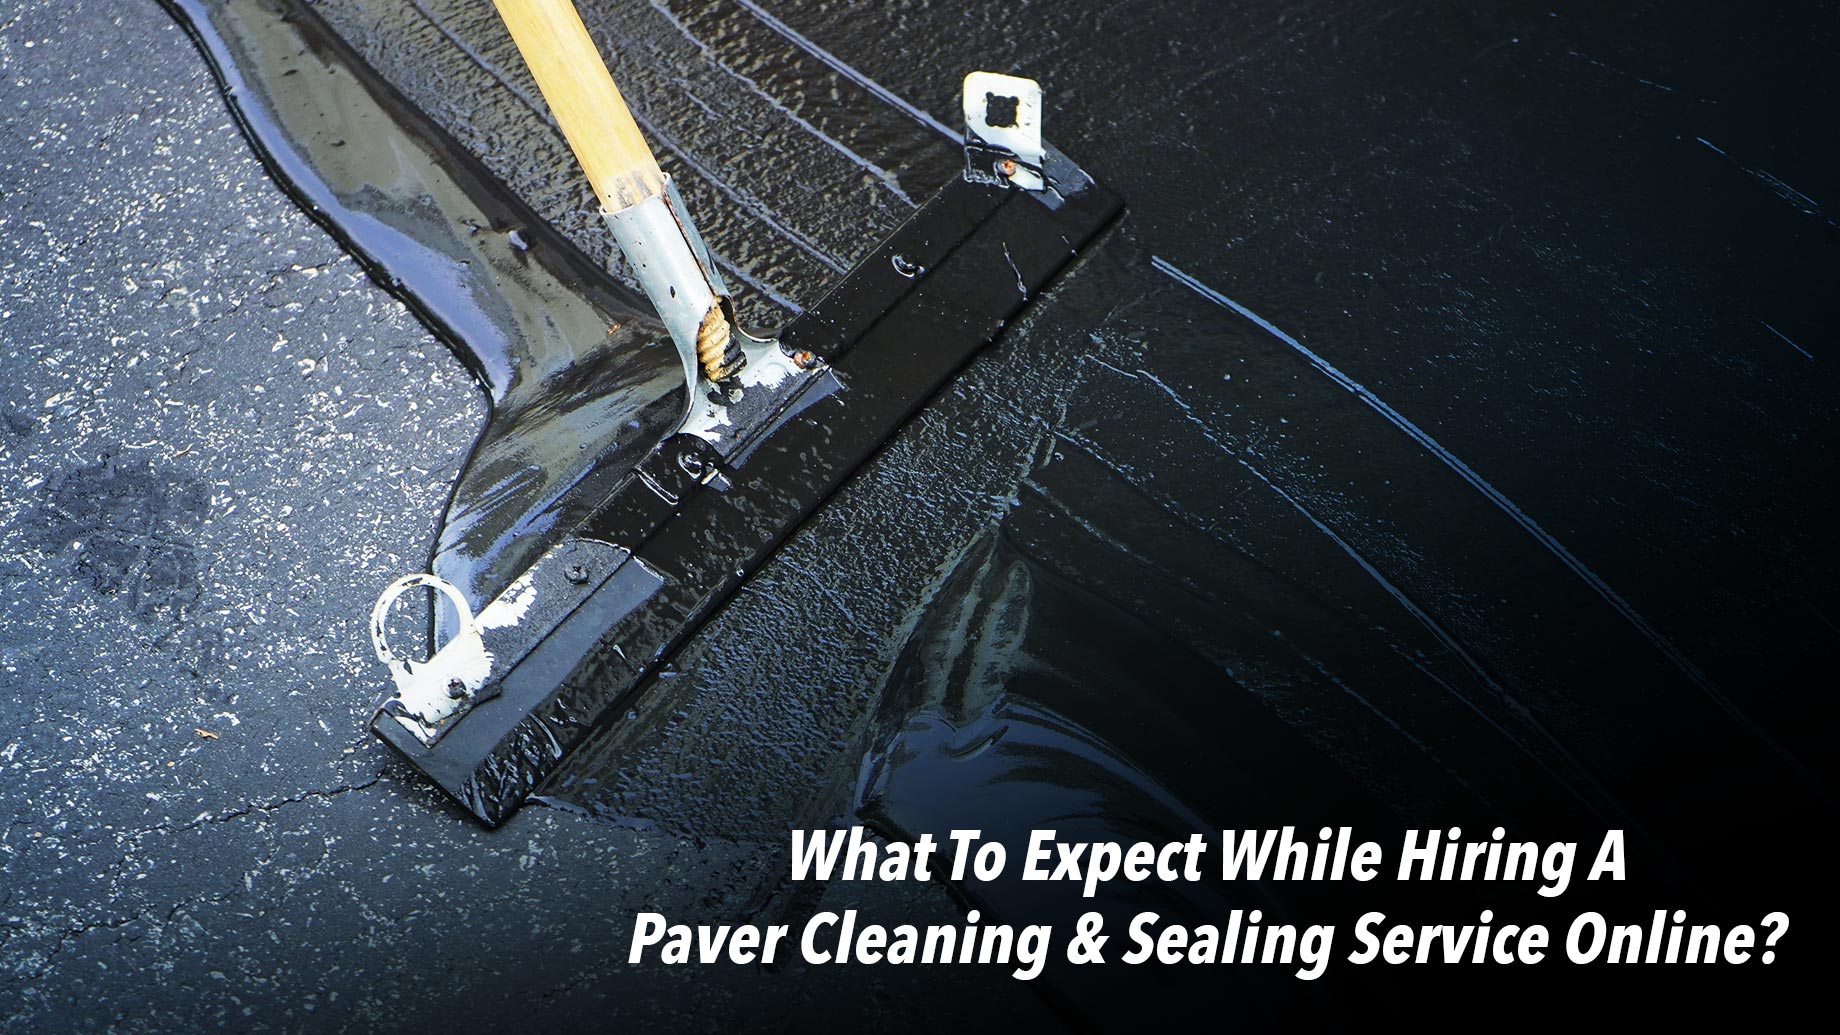 What To Expect While Hiring A Paver Cleaning & Sealing Service Online?